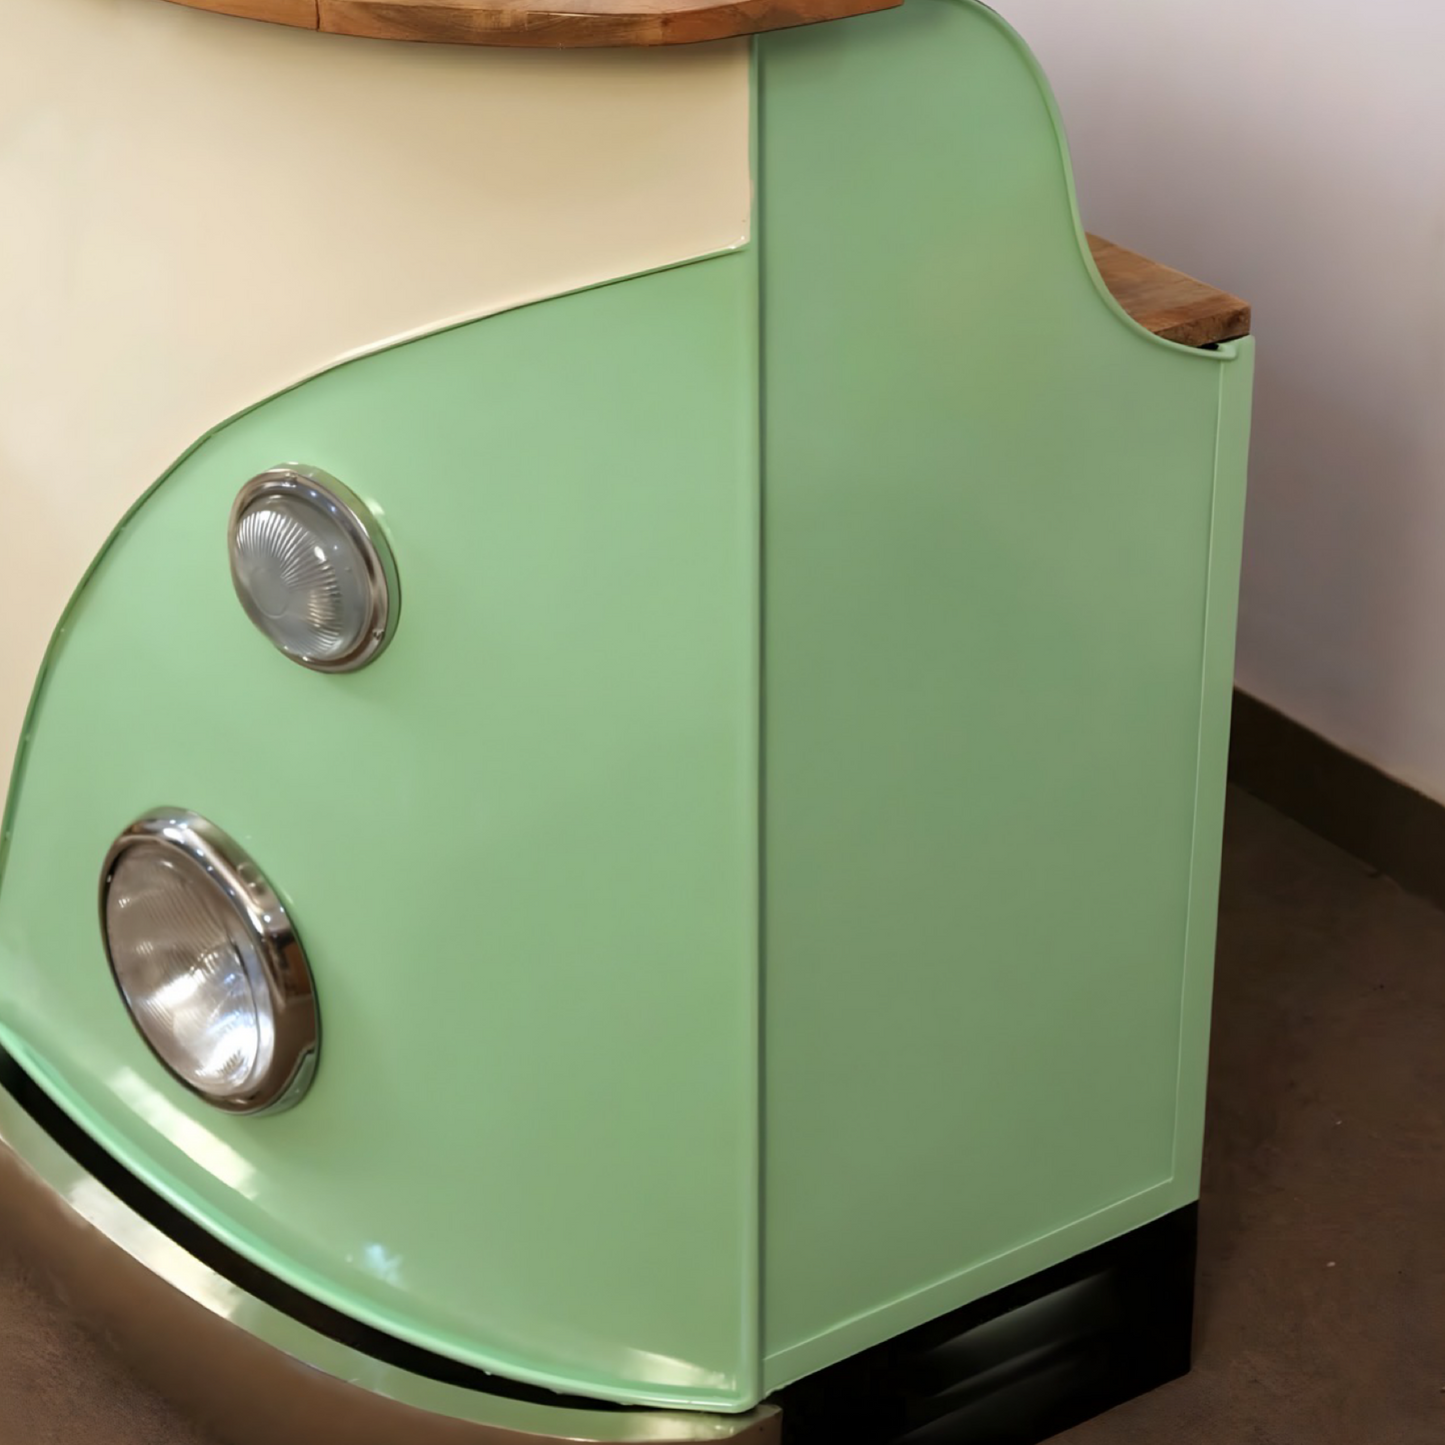 Elevate your home bar, reception or pub space with a unique and durable Vintage Volkswagen counter made from solid wood and metal. Perfect for entertaining guests, shop now!